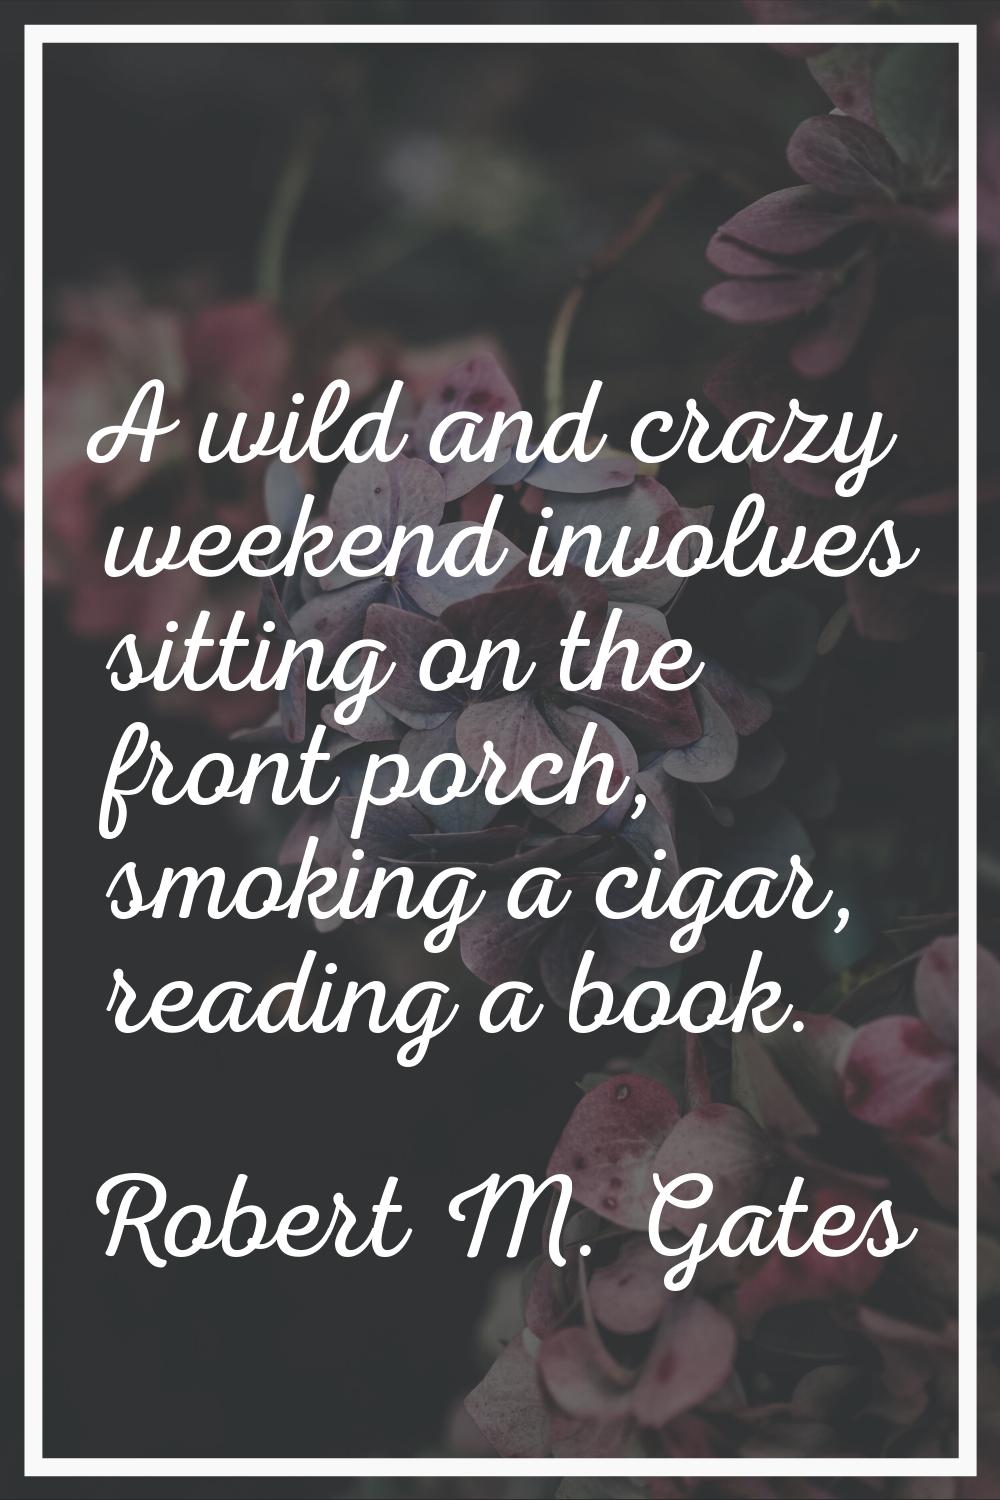 A wild and crazy weekend involves sitting on the front porch, smoking a cigar, reading a book.